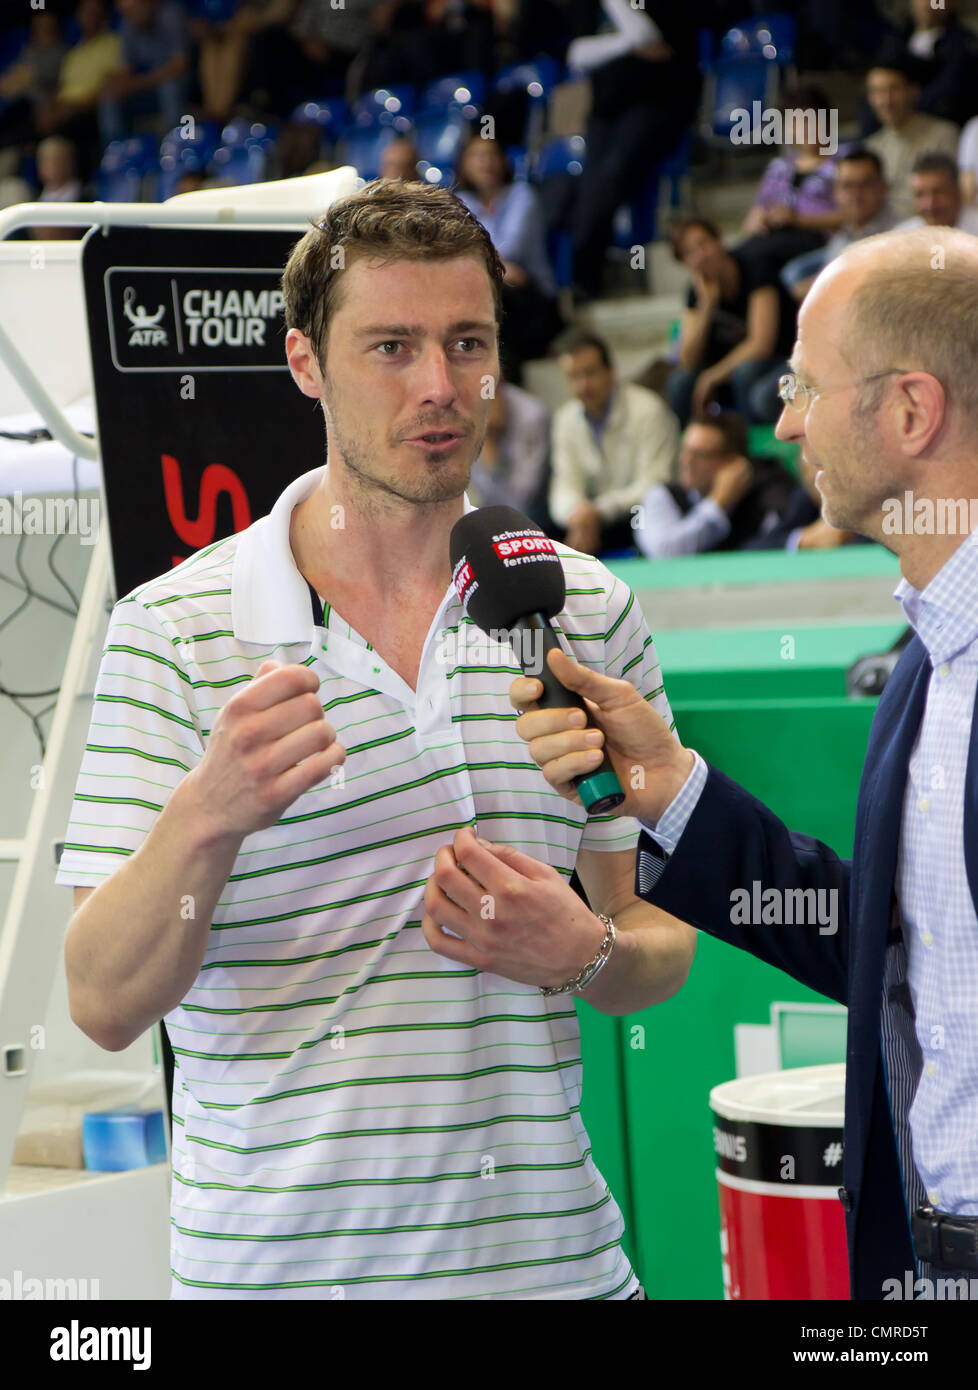 Marat Safin (l.) gives interviews after the 3rd place match against Mark Philippoussis which he lost at BNP Paribas Open Stock Photo